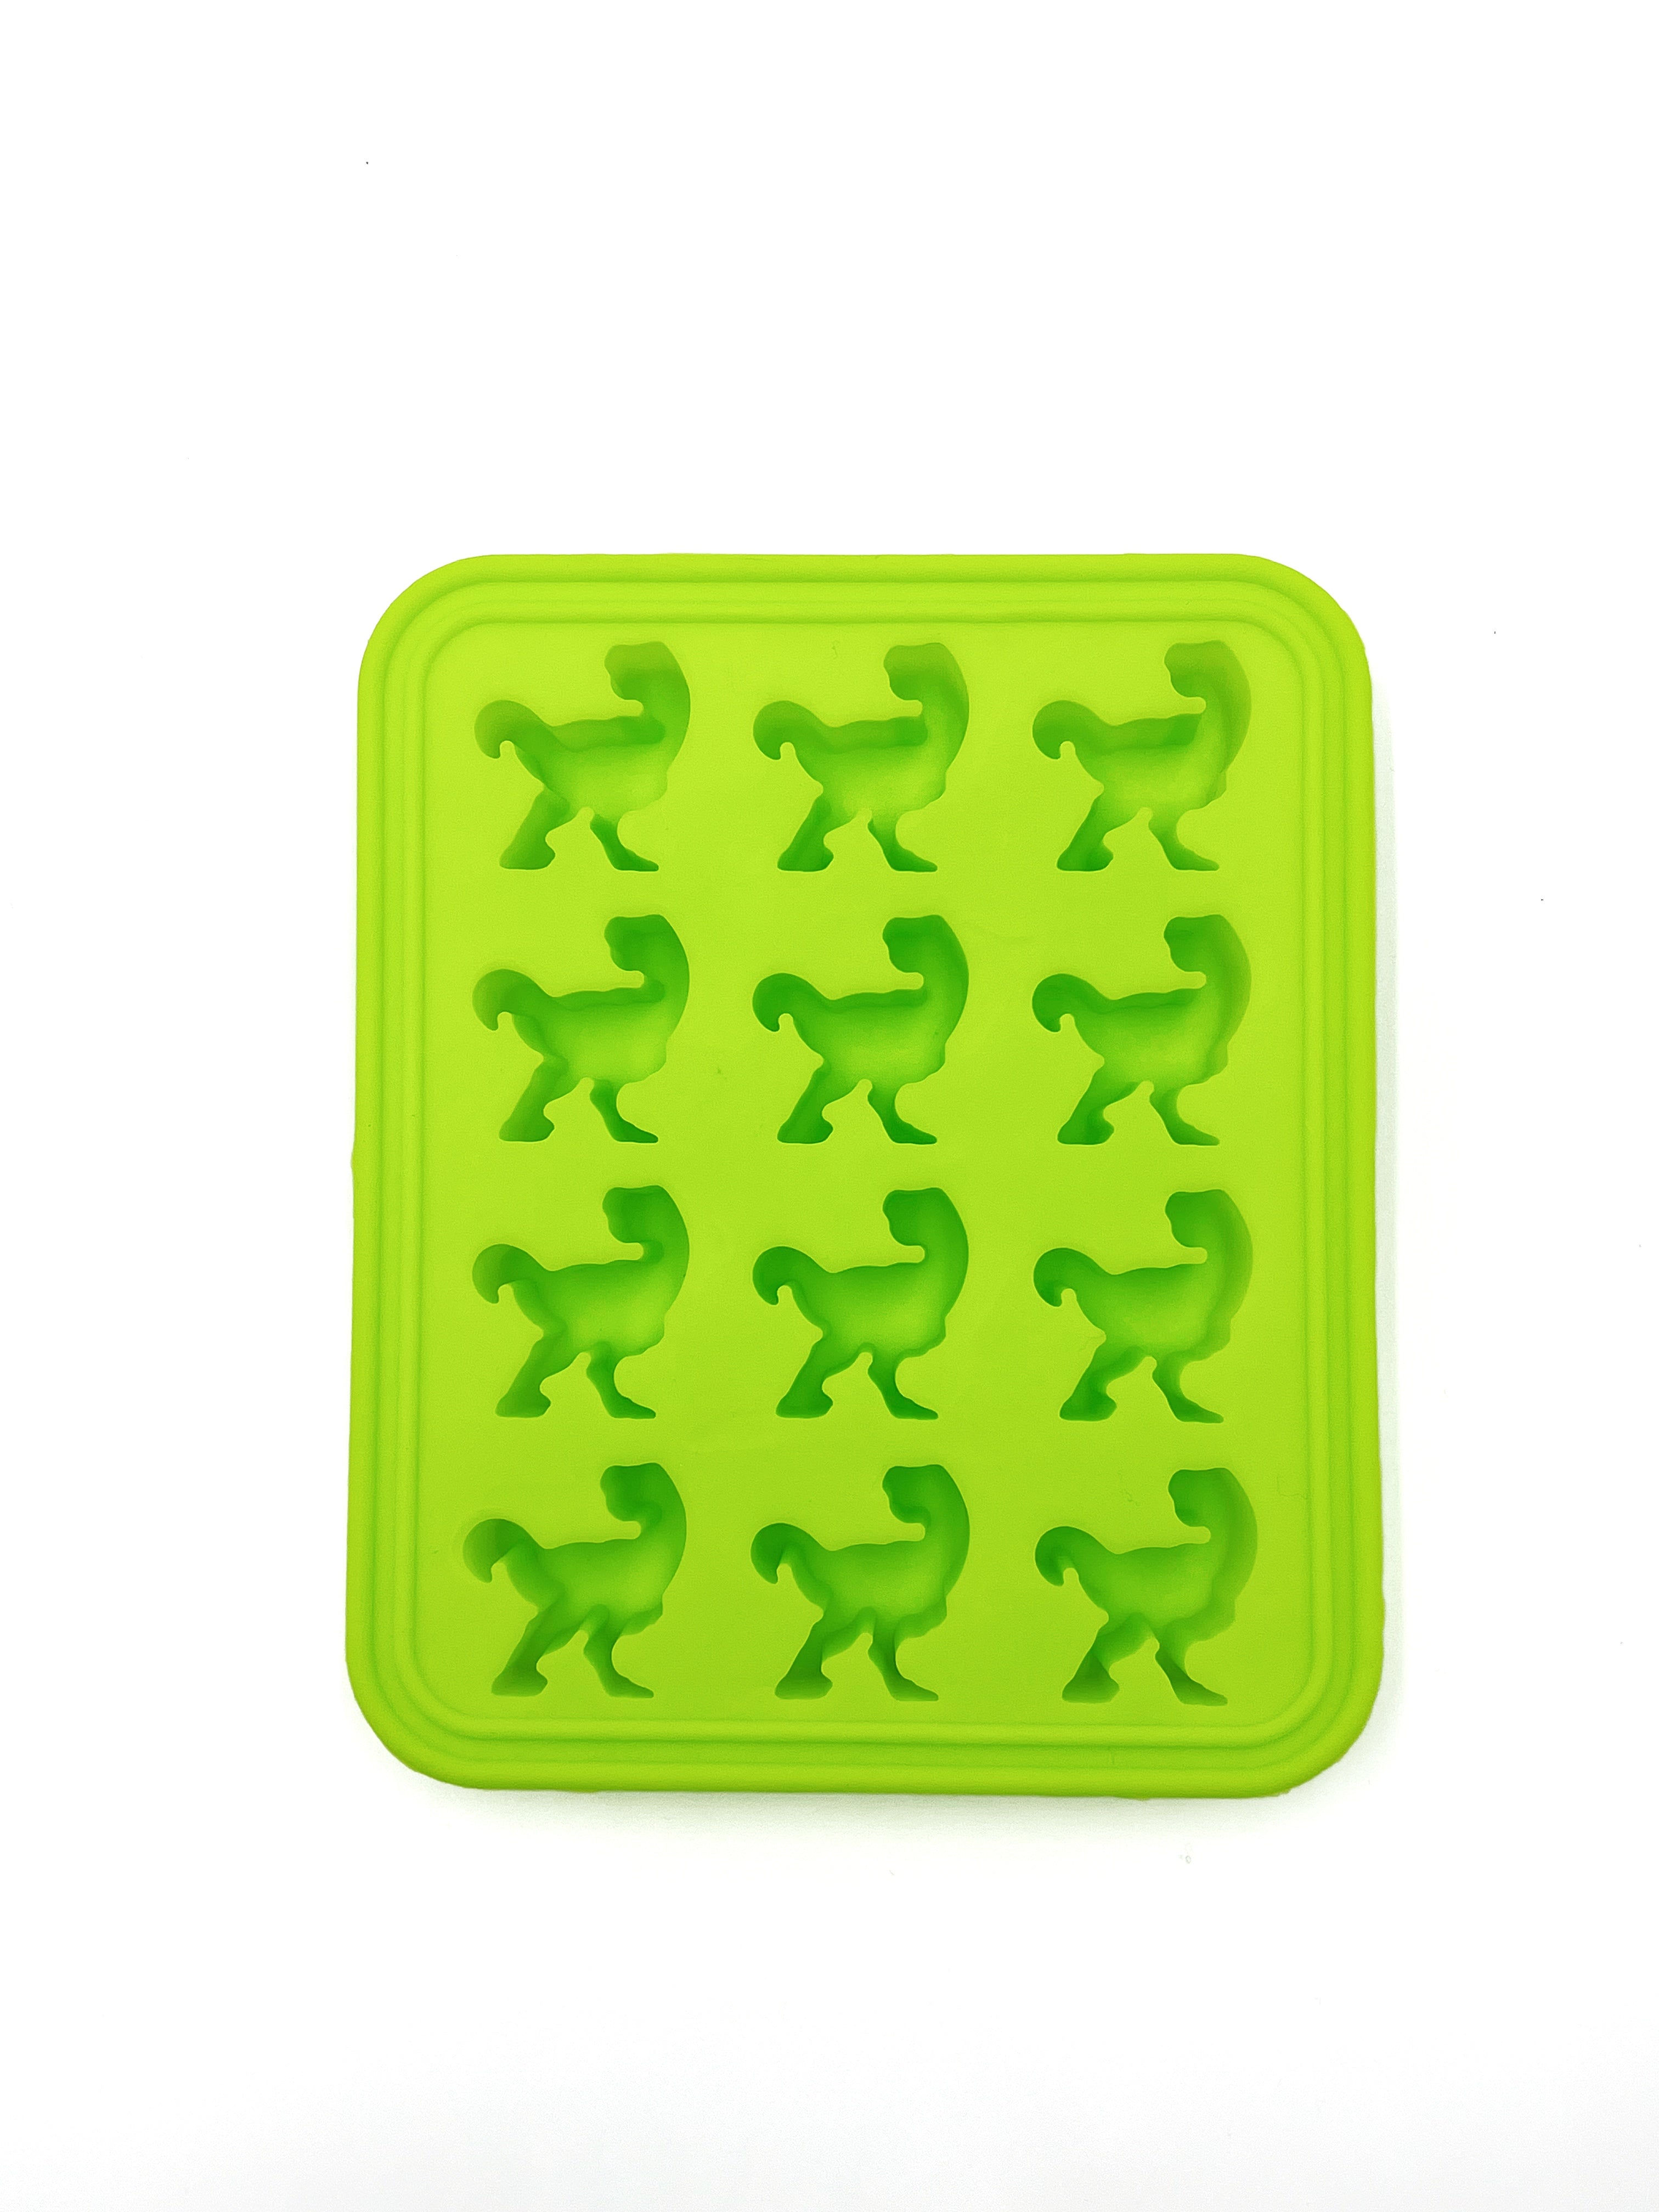 HMNS Dinosaur Ice Cube Tray – Houston Museum of Natural Science